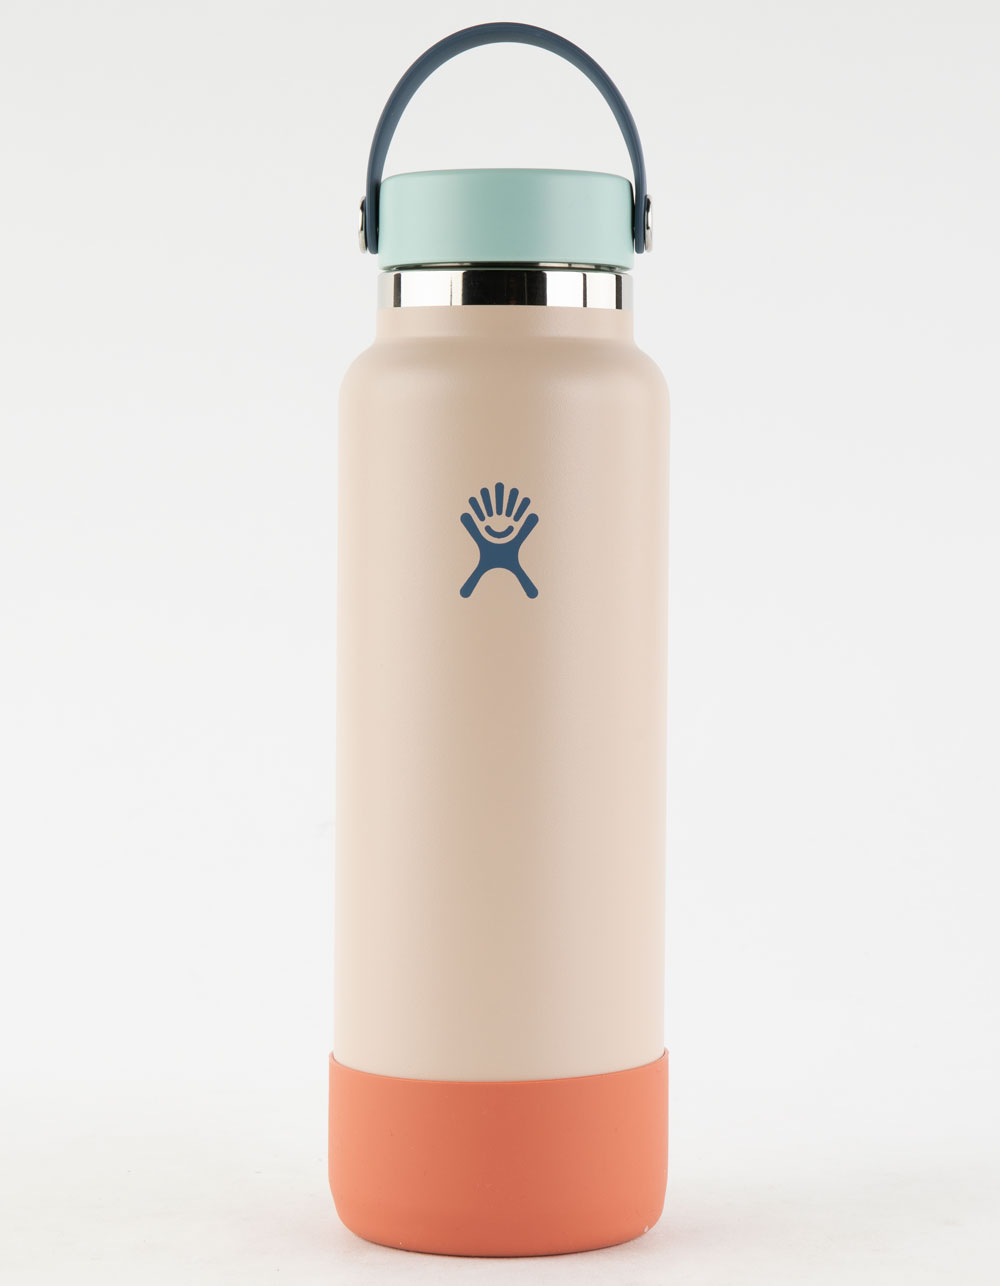 Hydro Flask 40 oz Wide Mouth Water Bottle - Special Edition - Cream - One Size